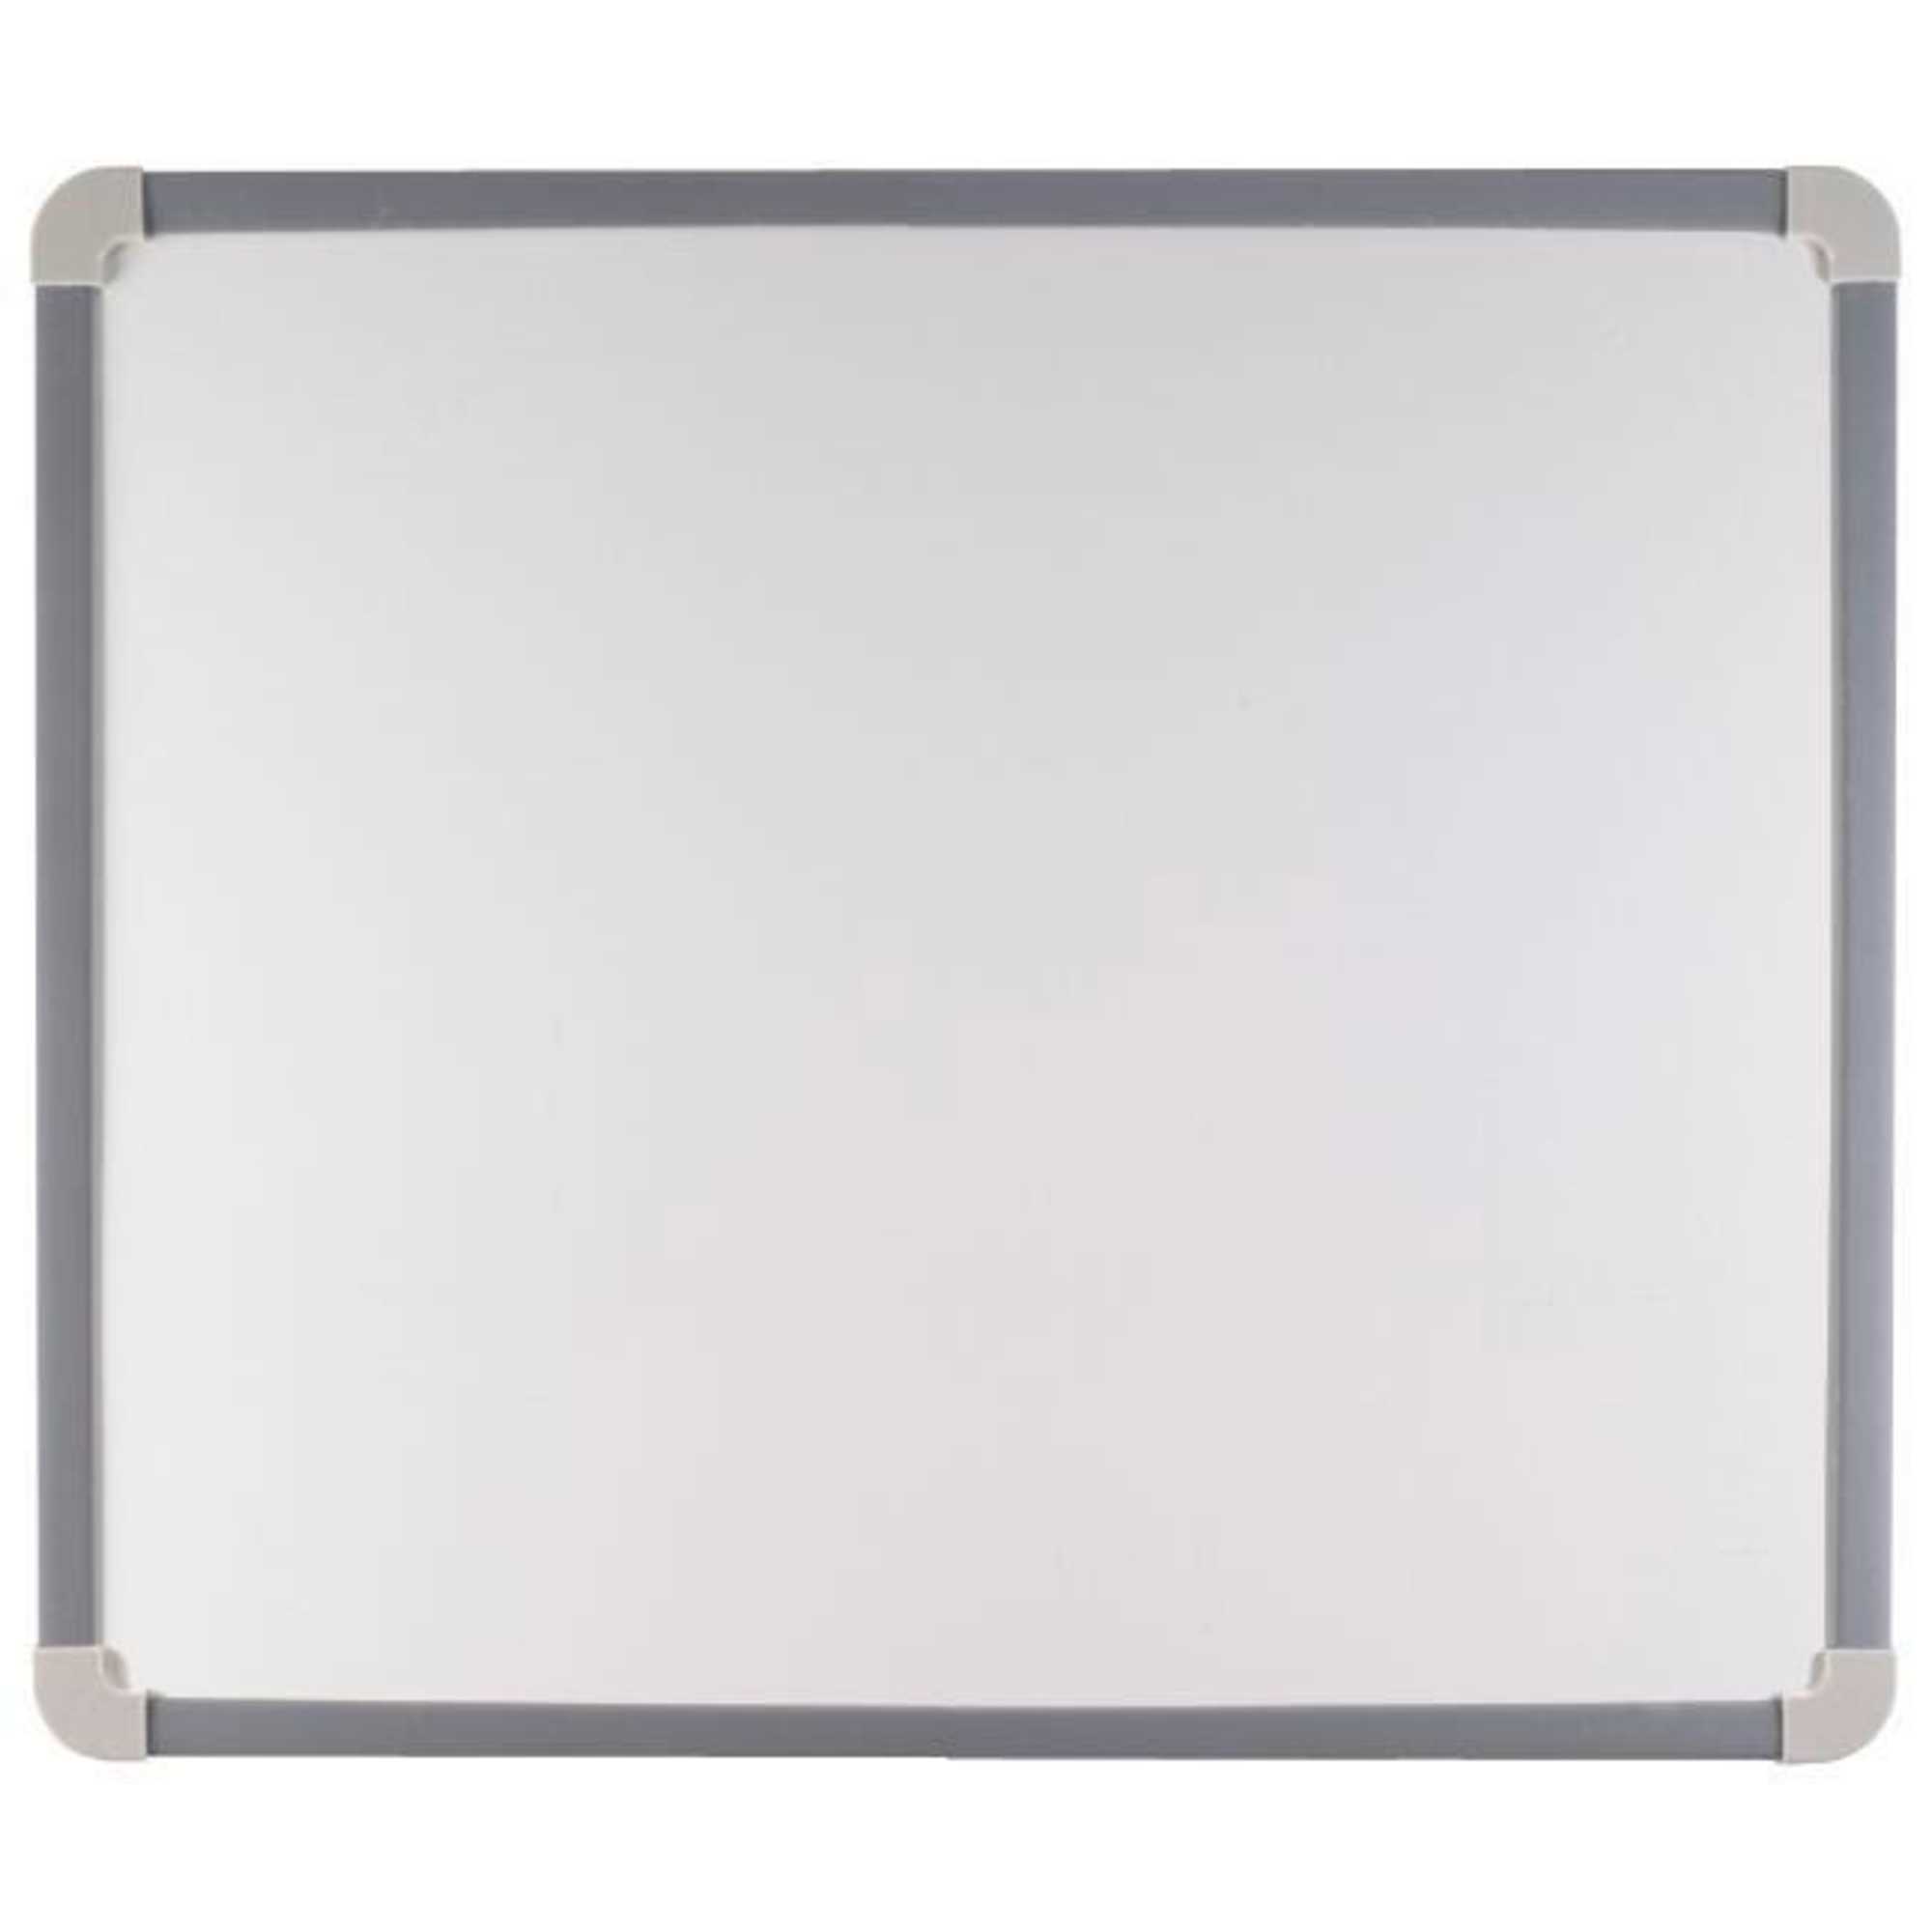 School Smart Large Magnetic Dry Erase Board, Aluminum Frame, 30 x 23 Inches - image 1 of 2